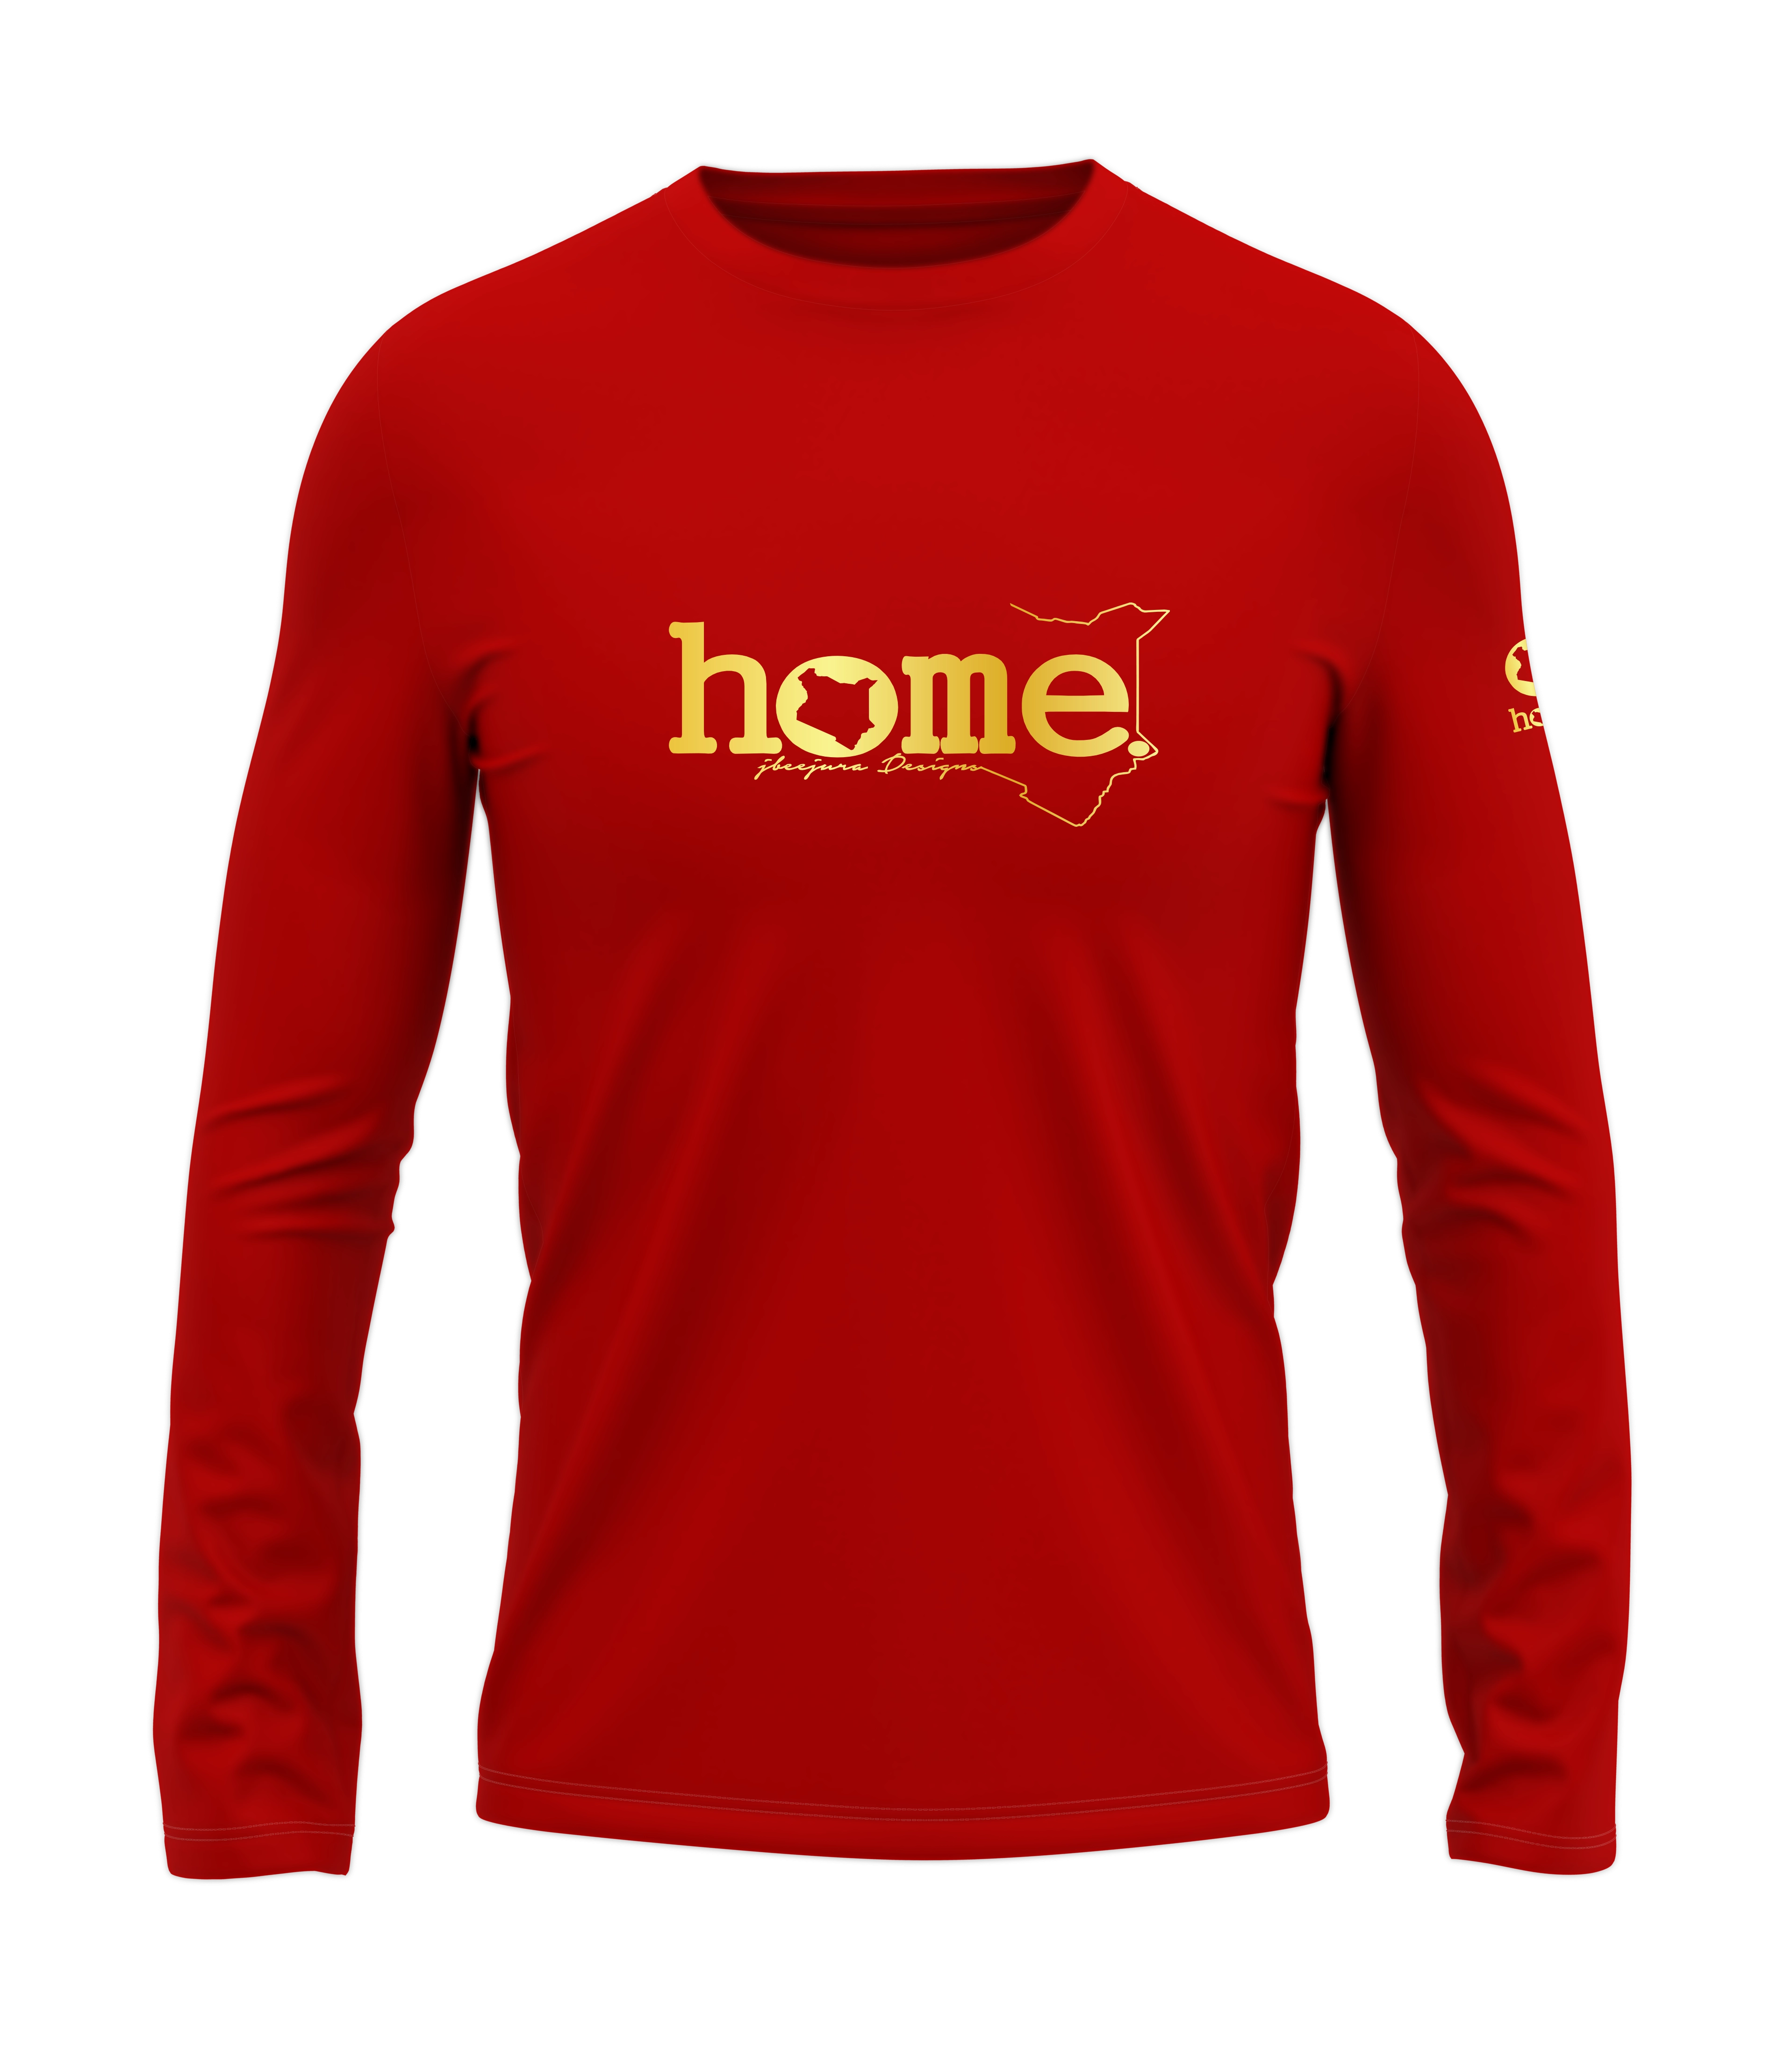 home_254 LONG-SLEEVED RED T-SHIRT WITH A GOLD CLASSIC WORDS PRINT – COTTON PLUS FABRIC